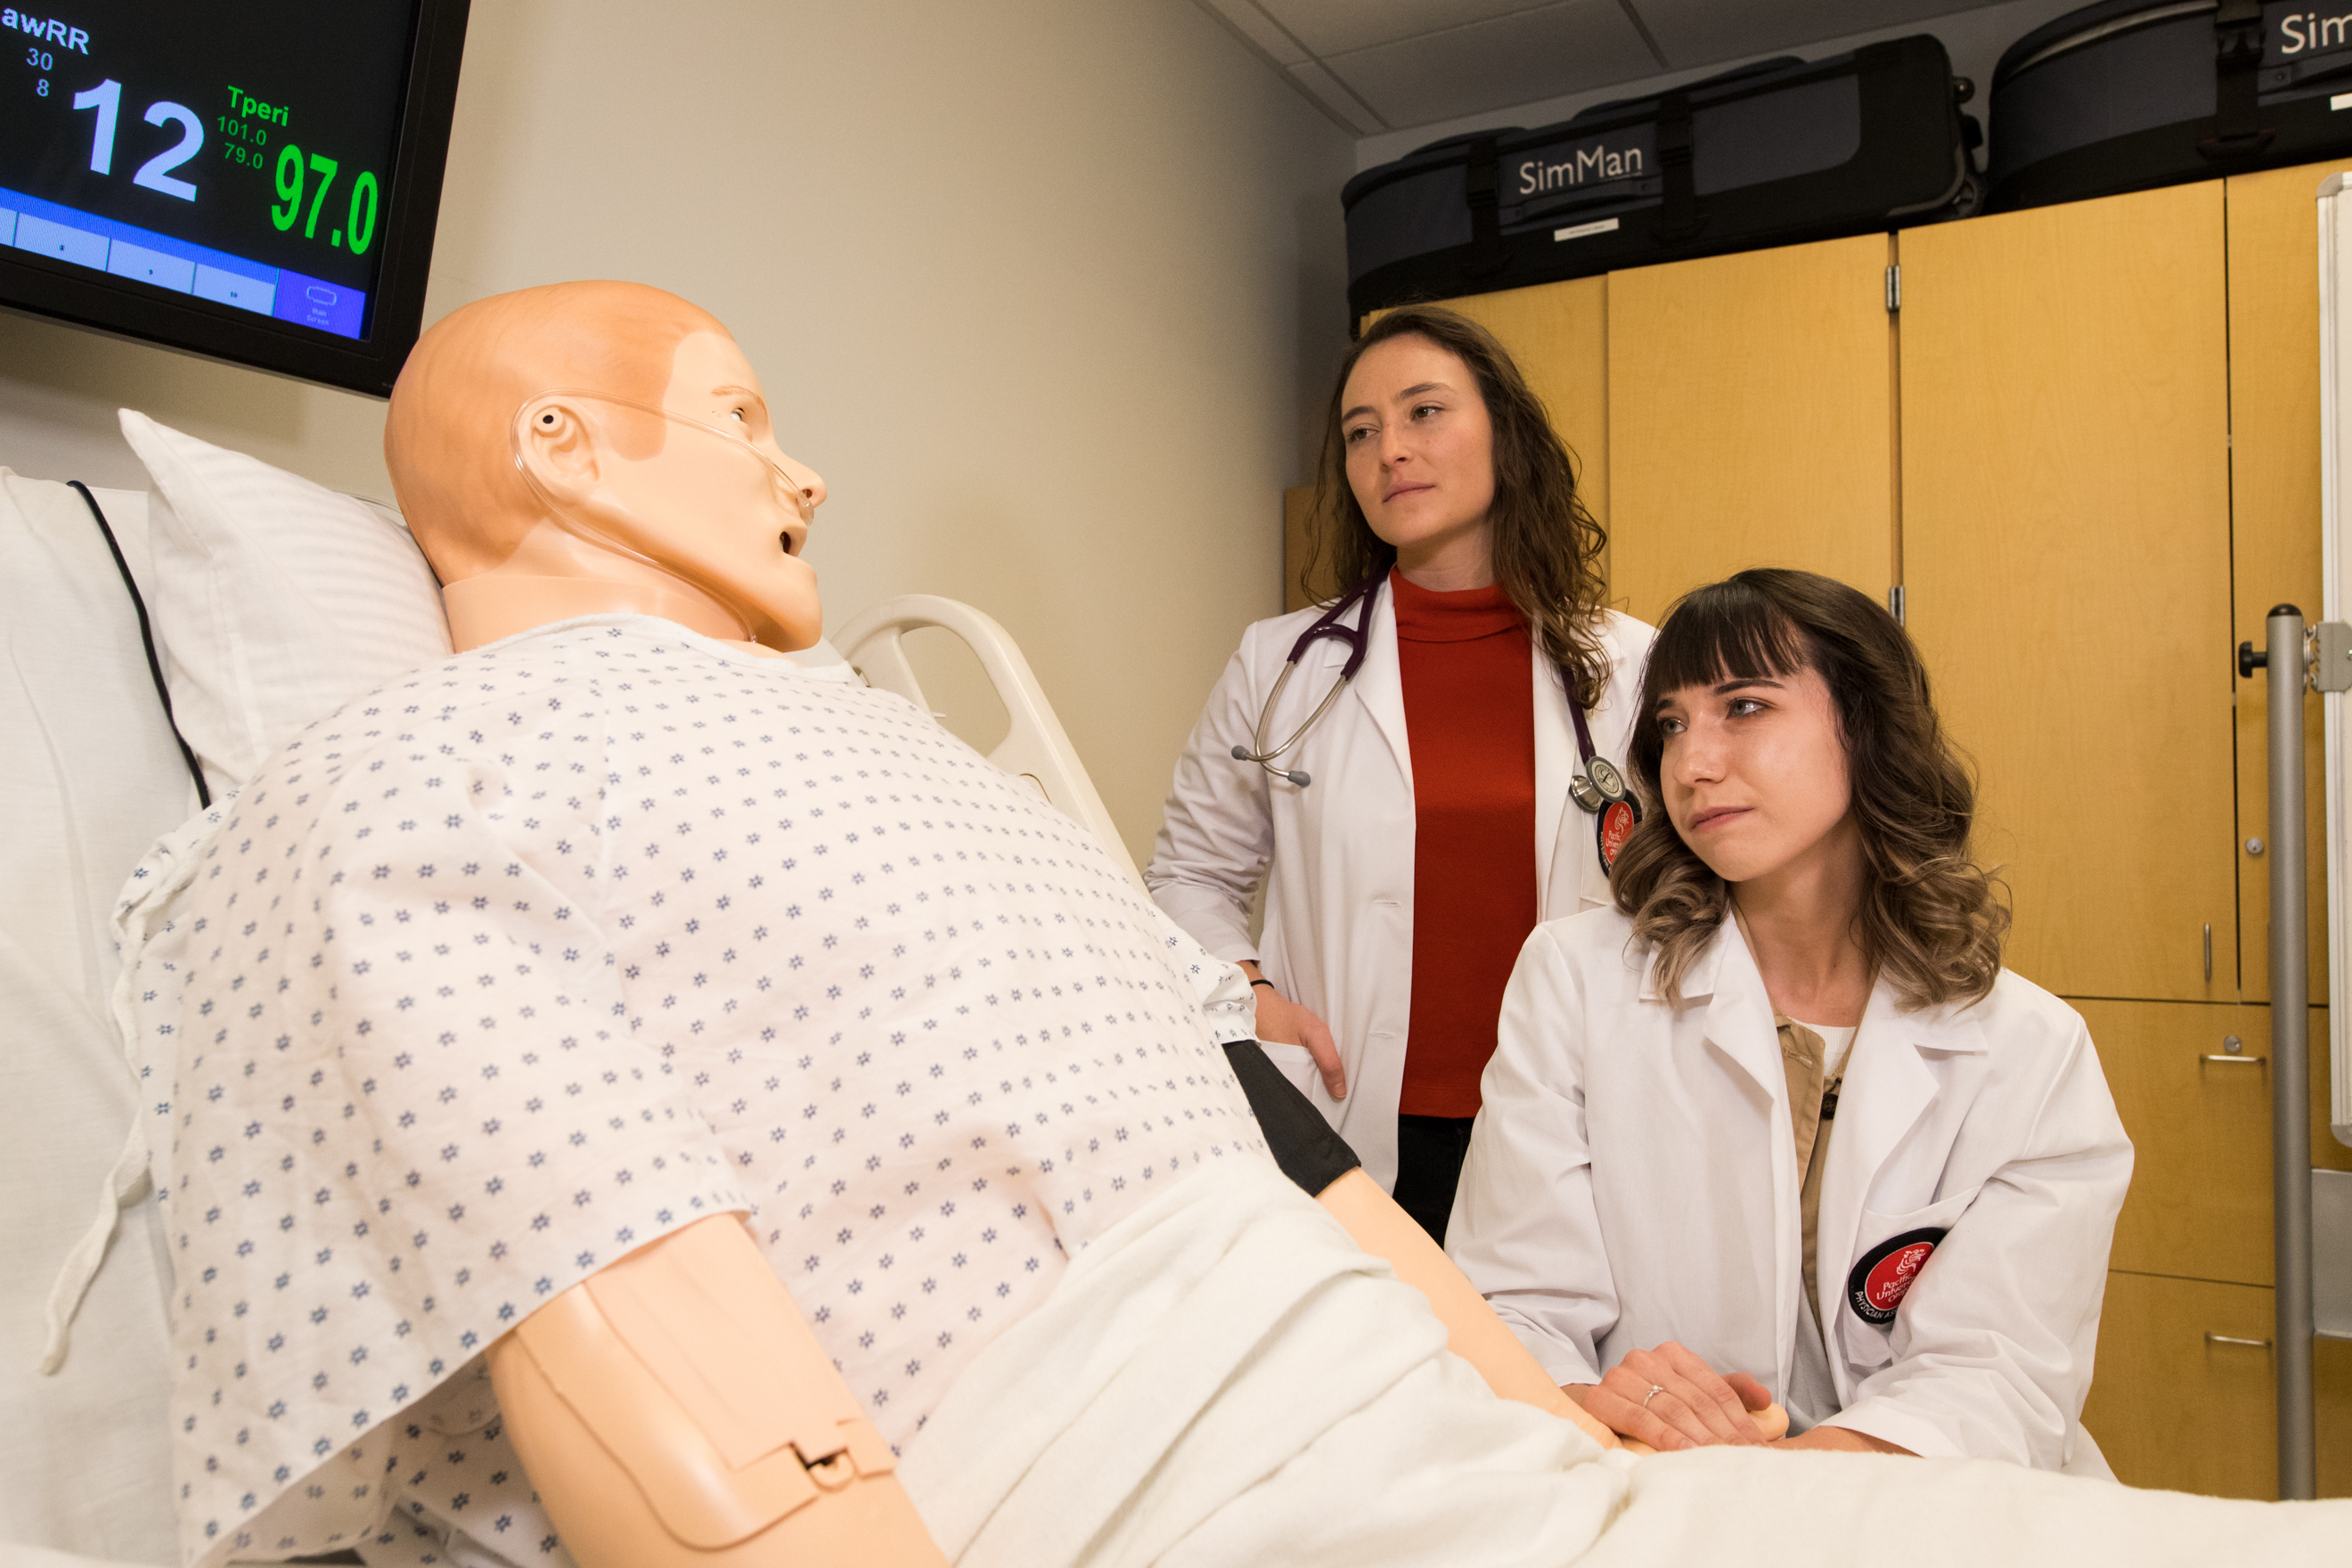 Two female physician assistant studies students observe a training dummy.